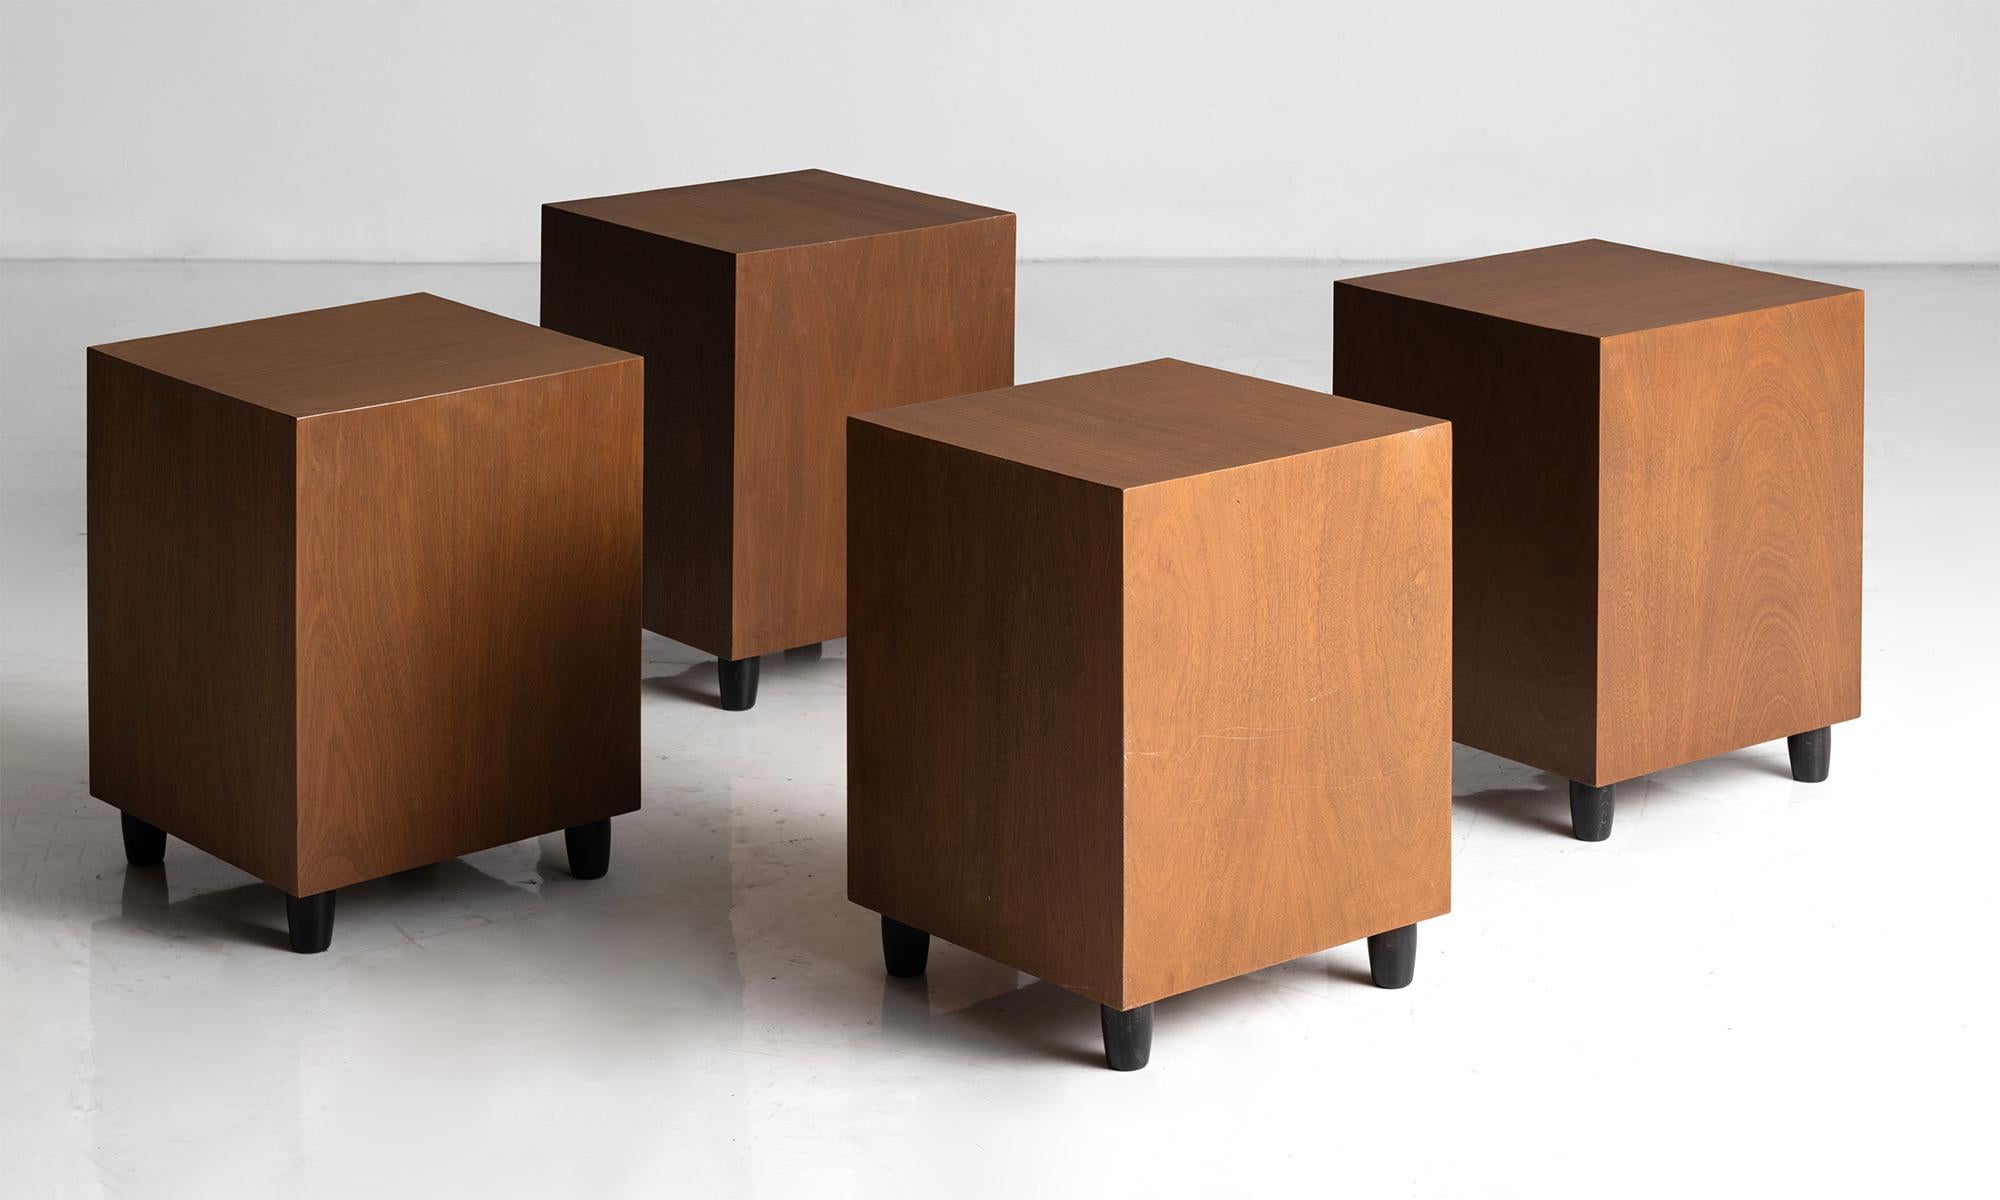 *Please note the price is per unit, and the tables are sold individually*

Cube side tables

Made in England

Simple table with oak veneer sitting on ebonised beech feet.

Measures: 15”L x 15”D x 20.5”H